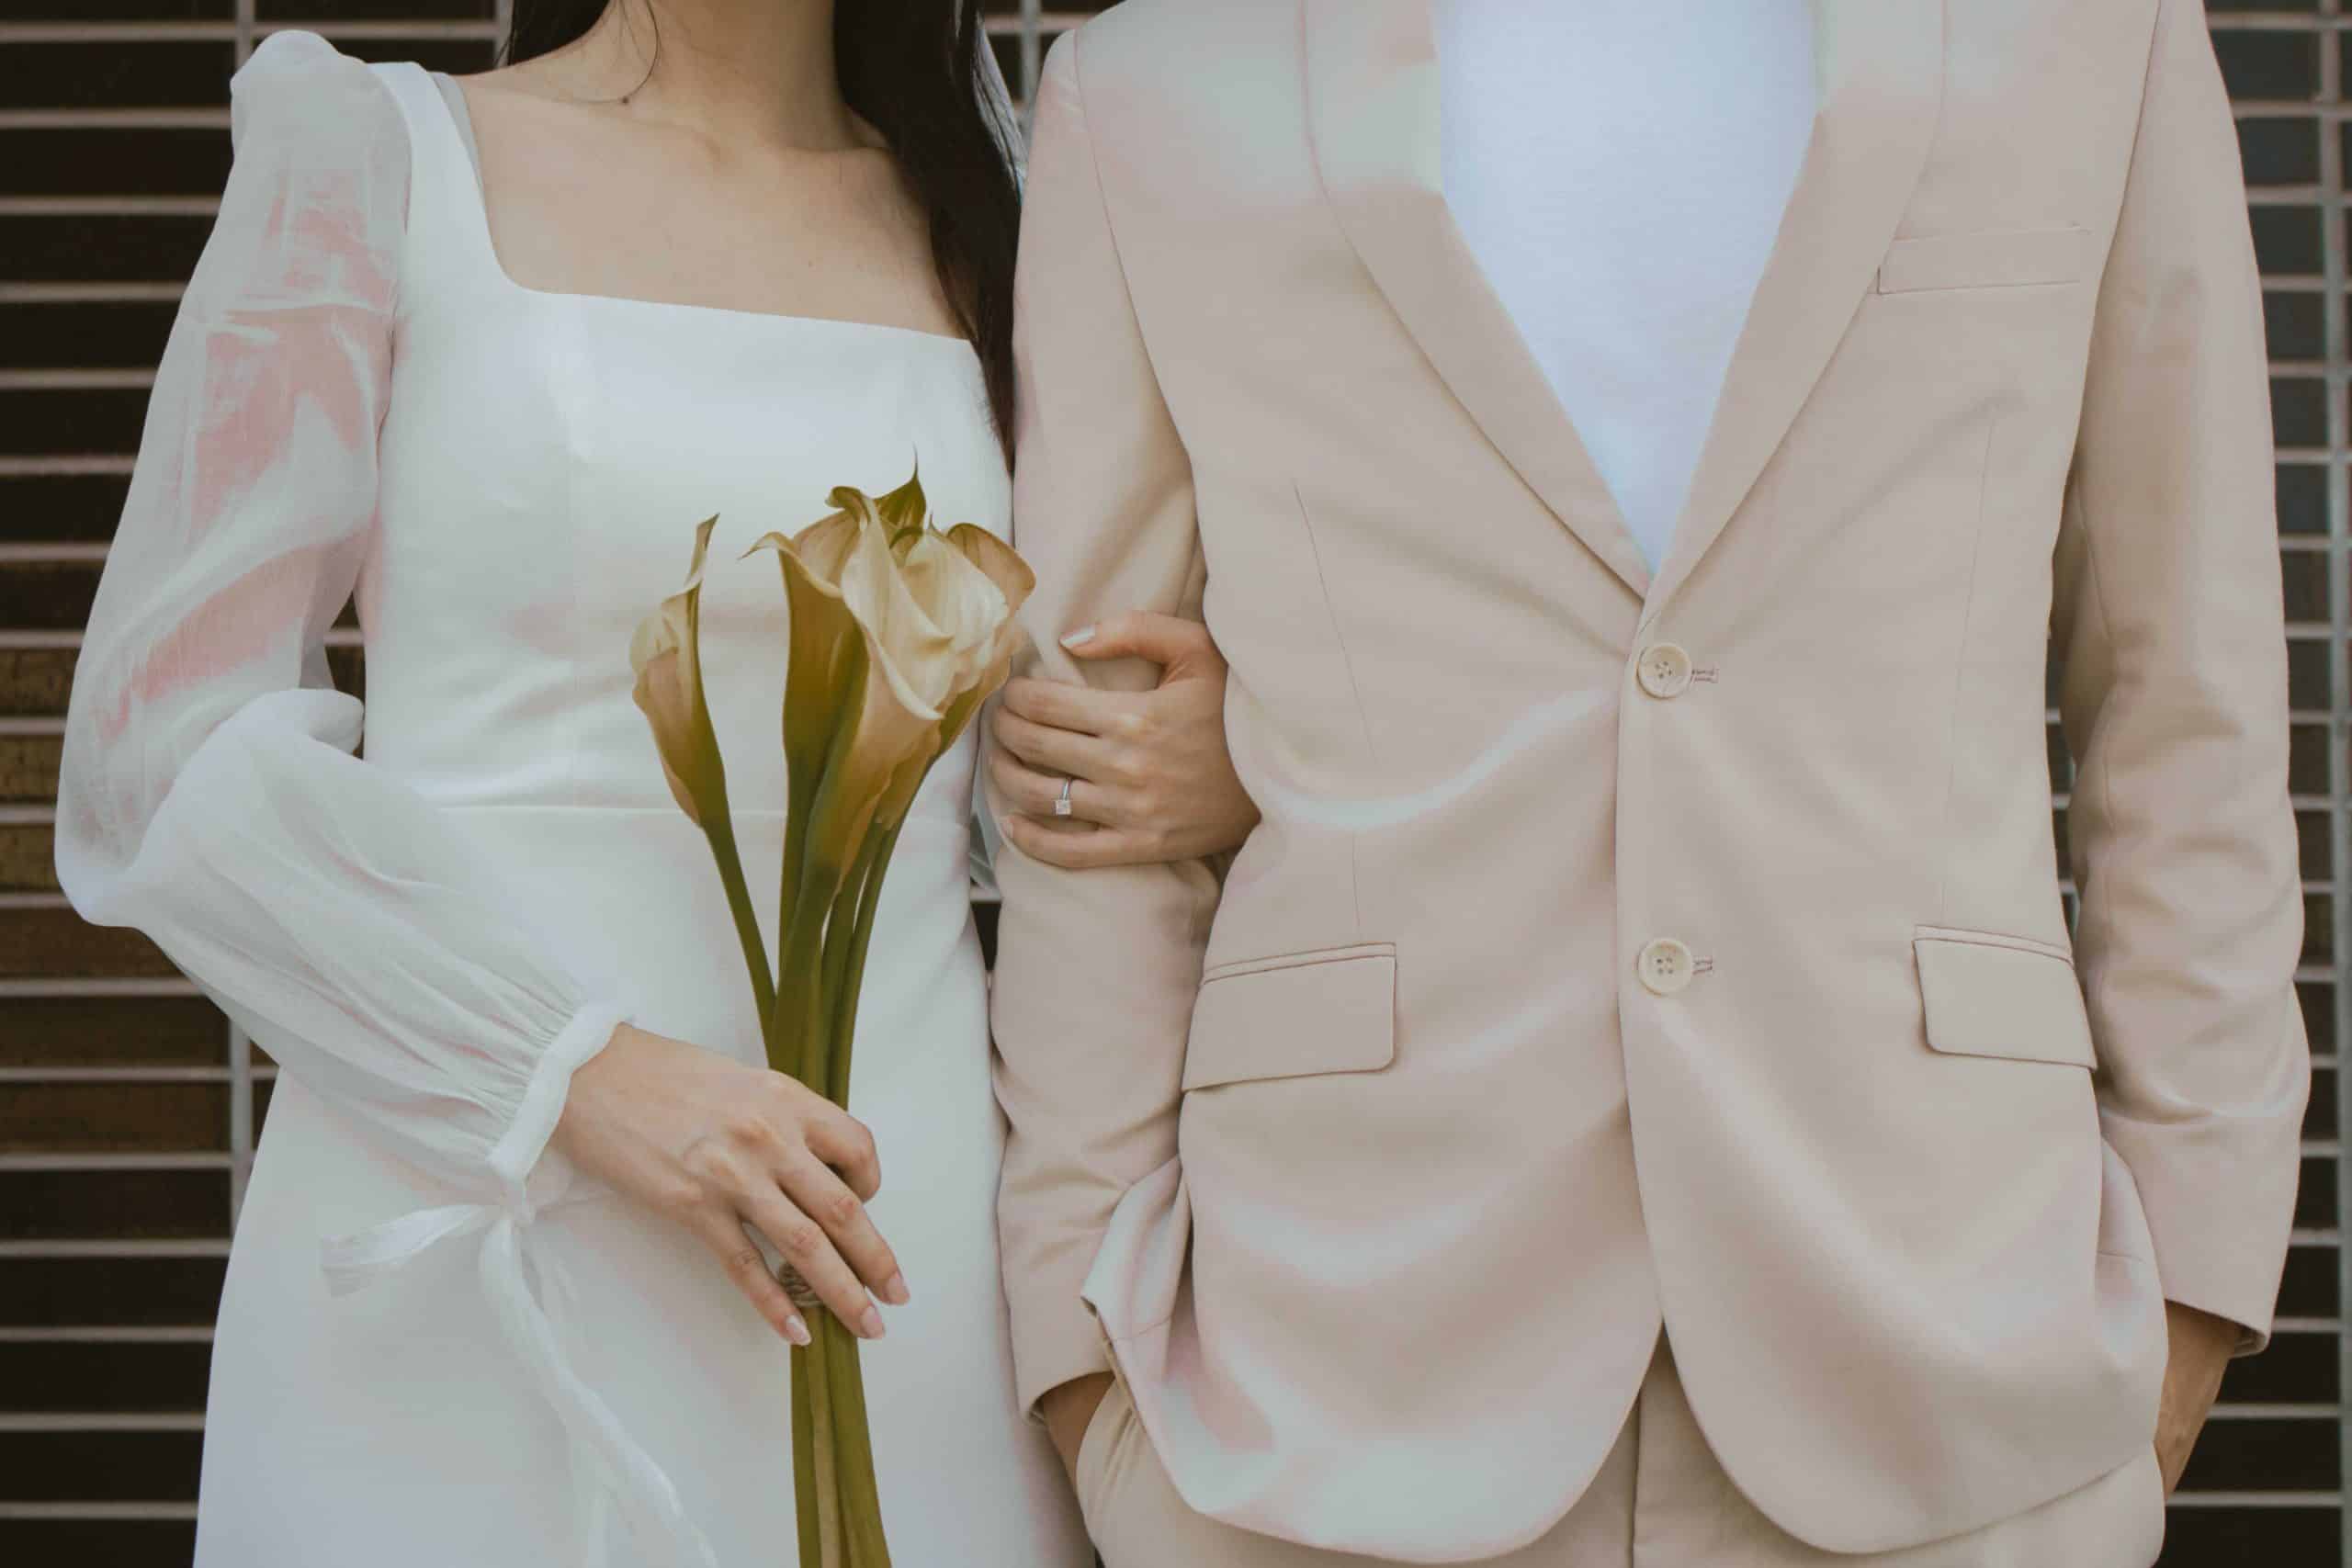 Groom in beige suit and bride with flowing sleeves on her dress holding a bouquet of flowers